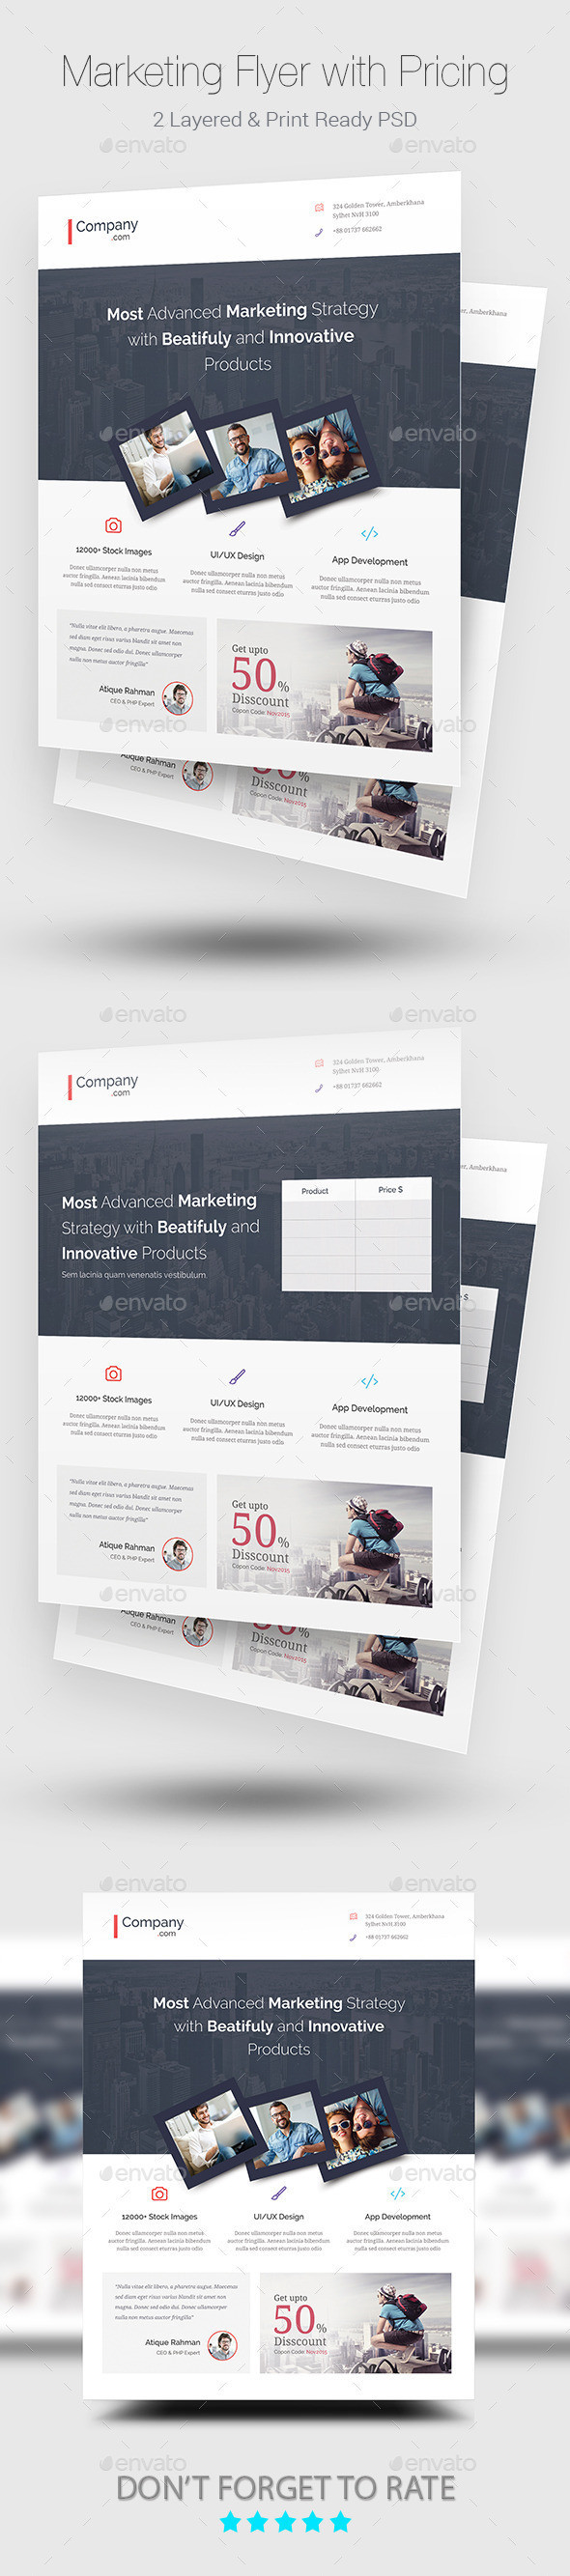 Preview minimal marketing flyer with pricing table